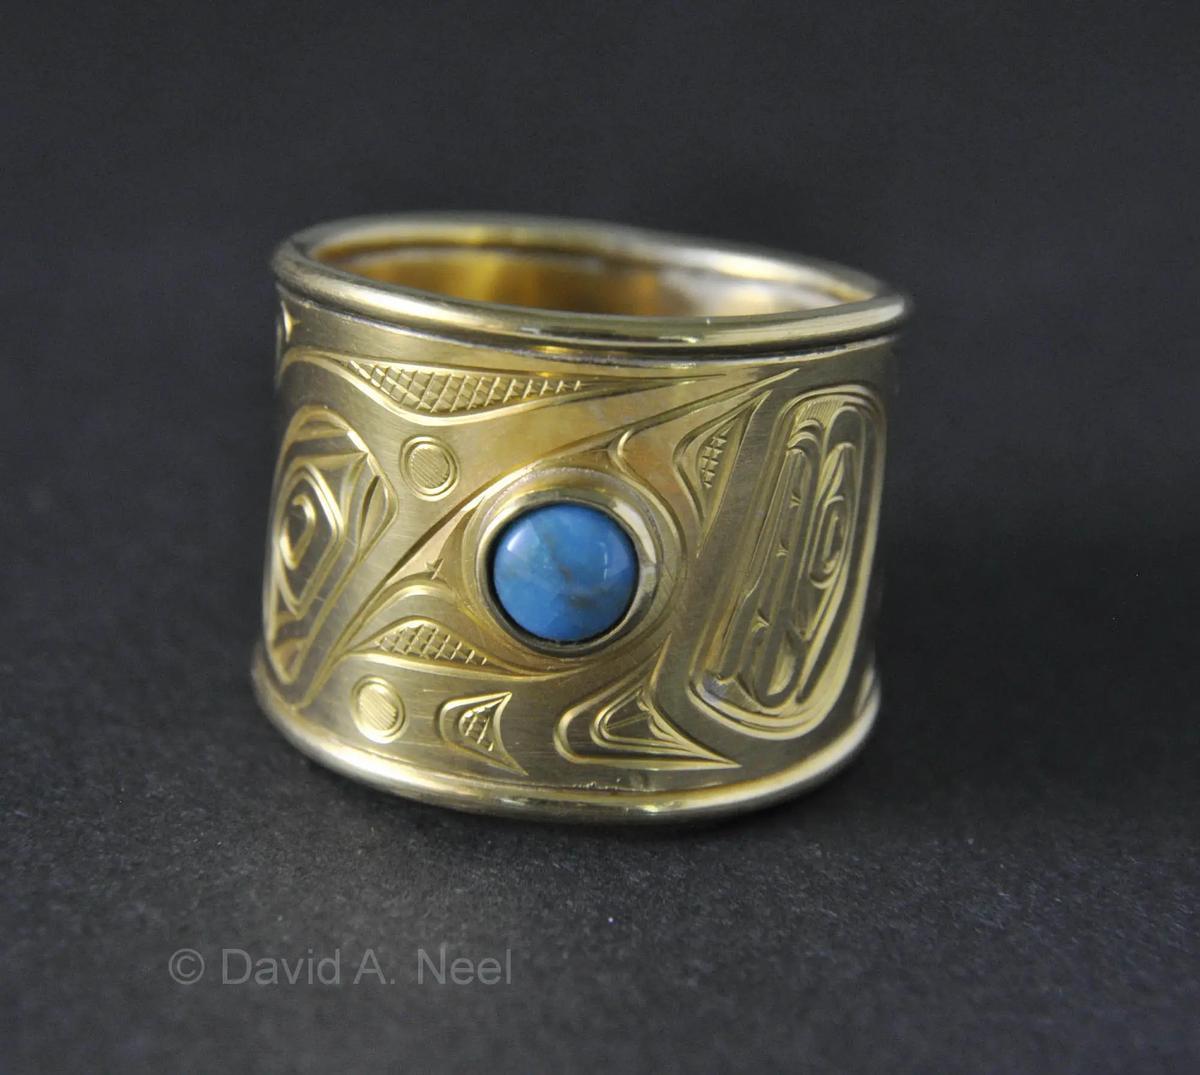 Hummingbird Ring with Turquoise Setting